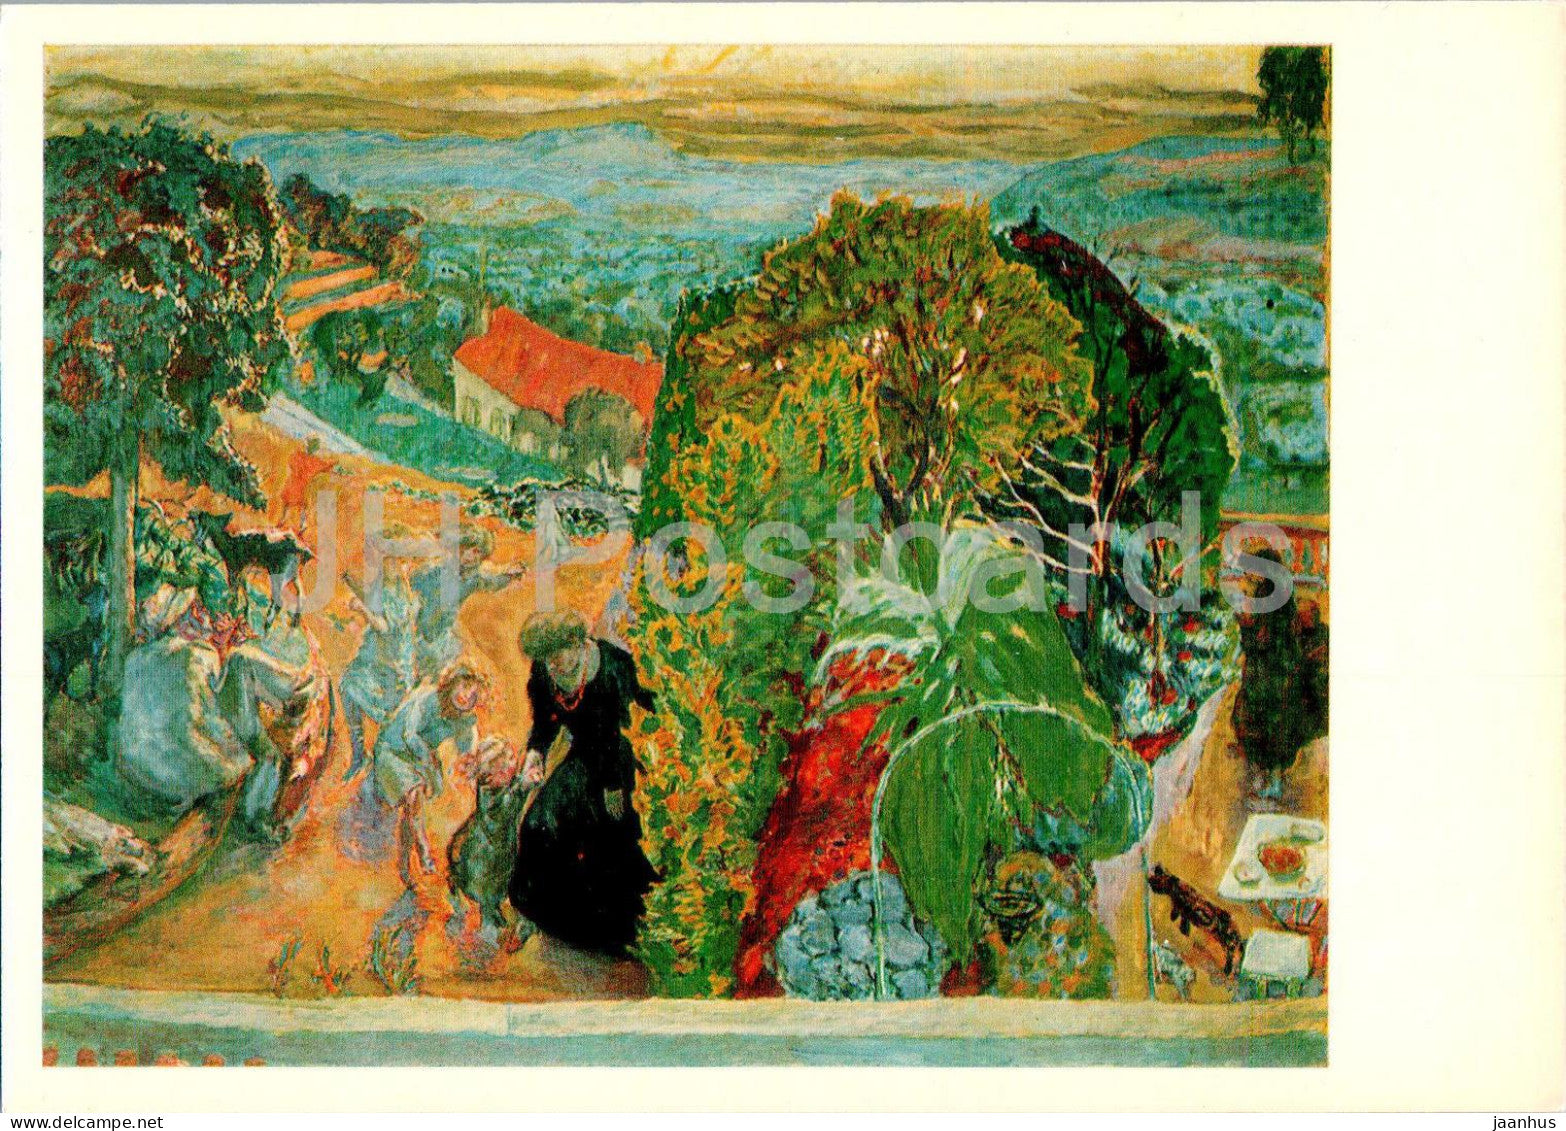 painting by Pierre Bonnard - Early Spring in a Village - French art - 1977 - Russia USSR - unused - JH Postcards